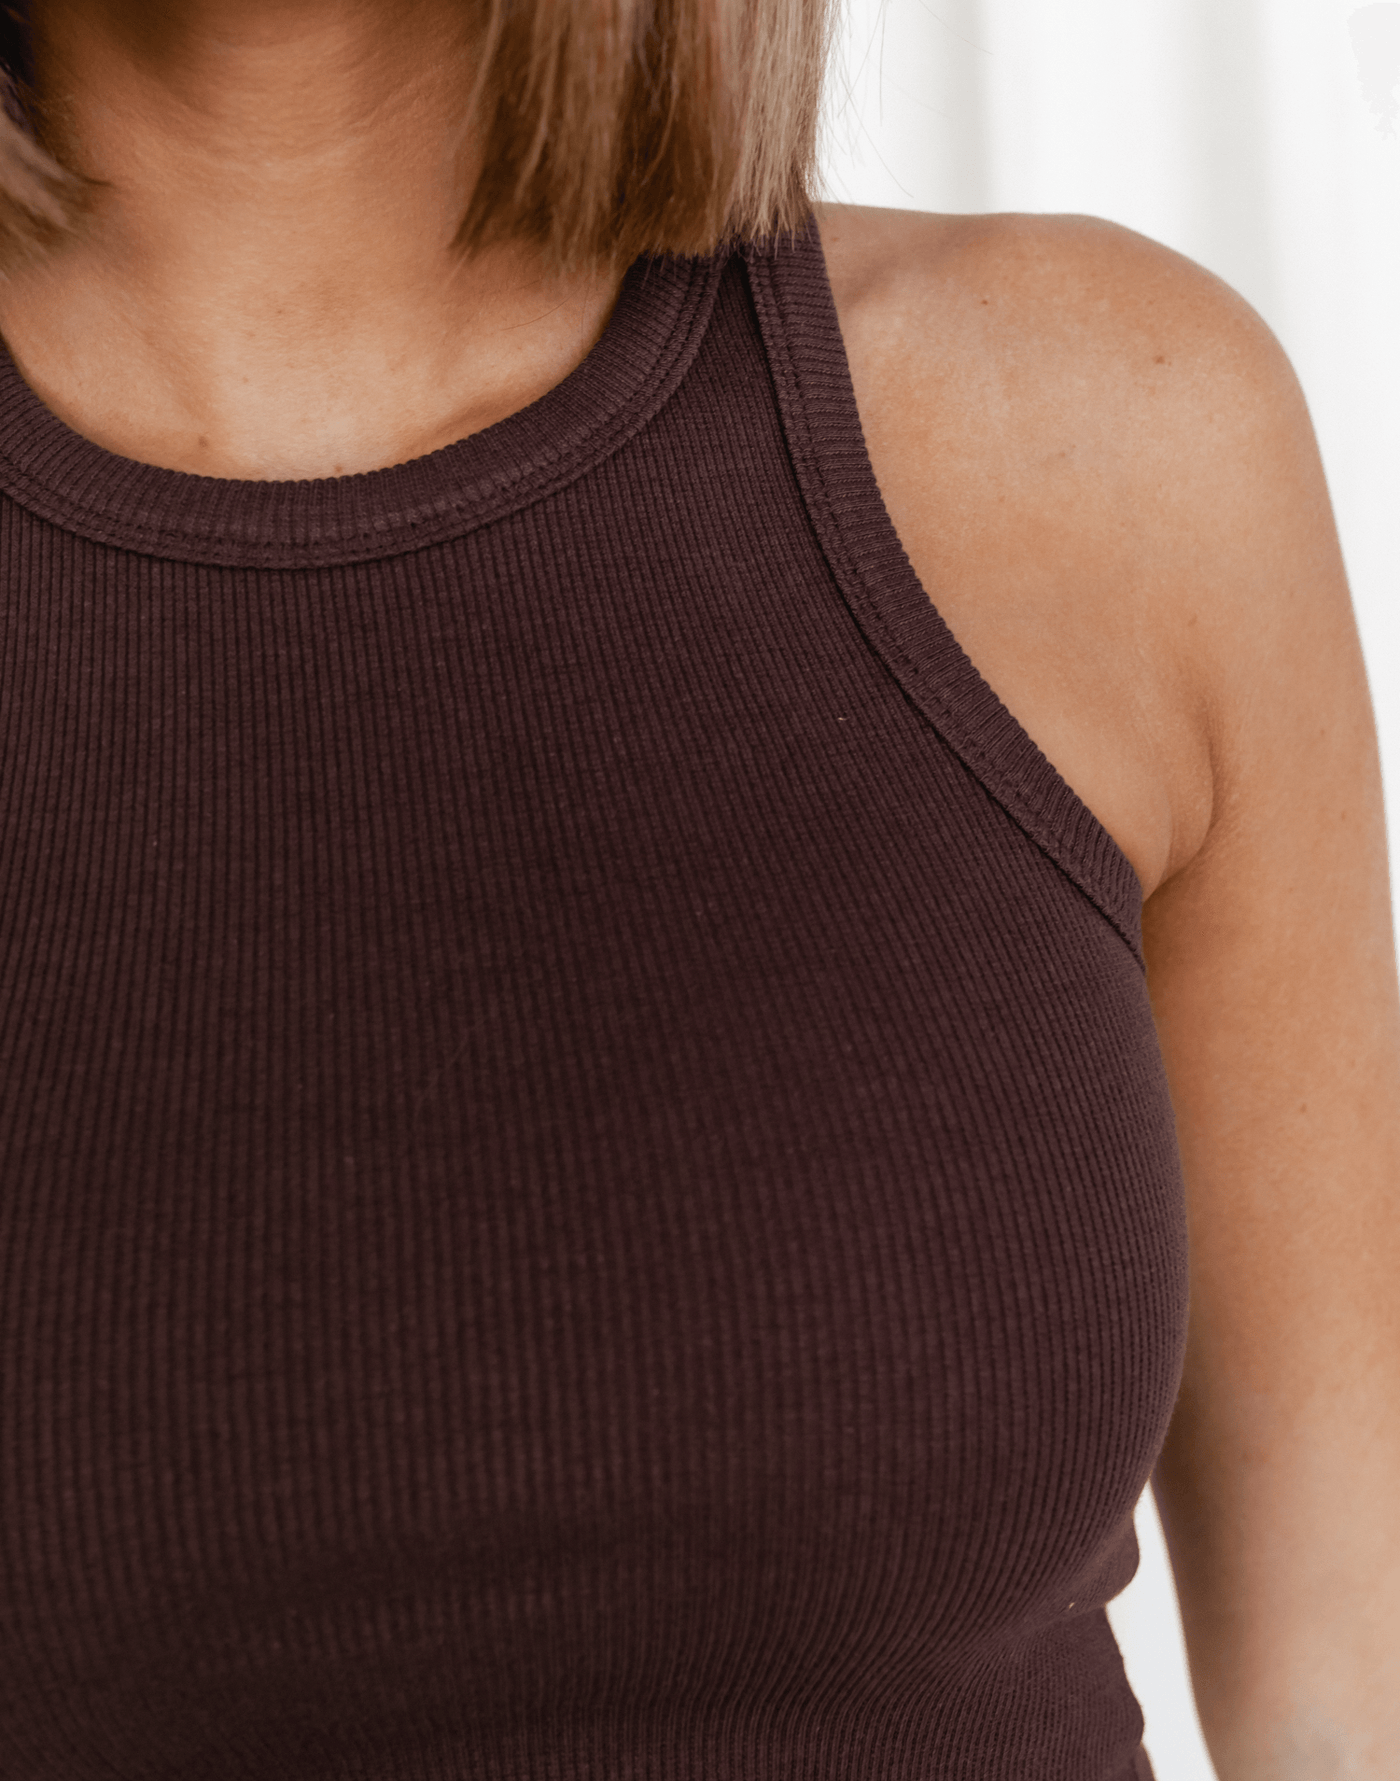 Kennedy Tank Top (Brown) - Basic Brown Singlet Top - Women's Top - Charcoal Clothing